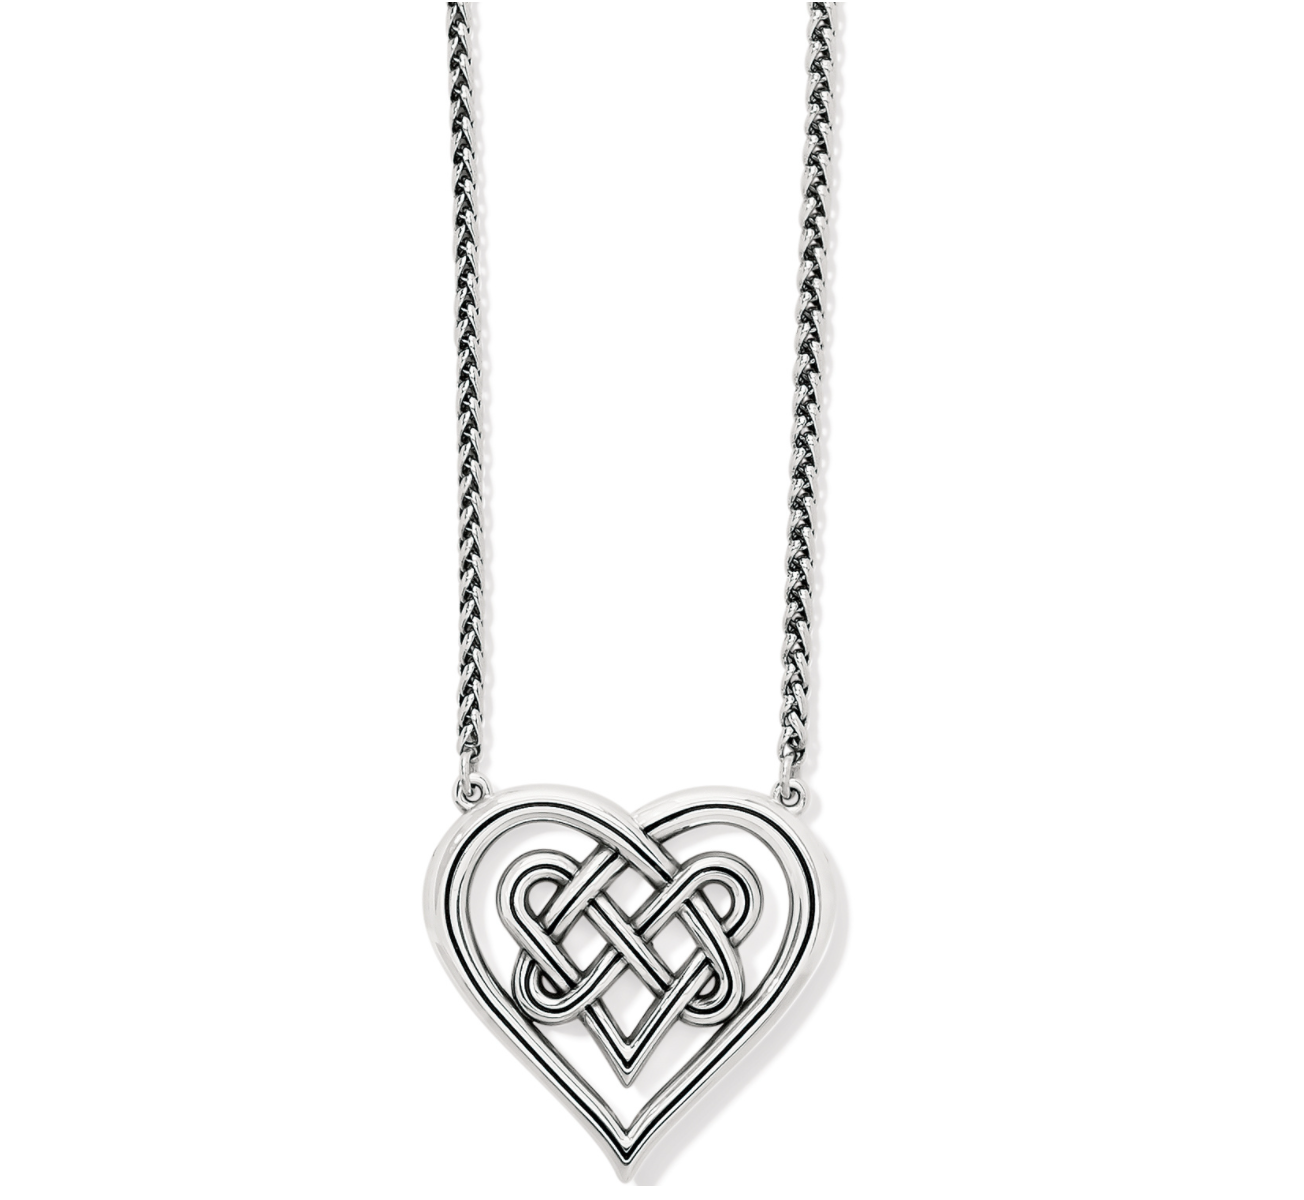 Brighton heart necklace and - Gem